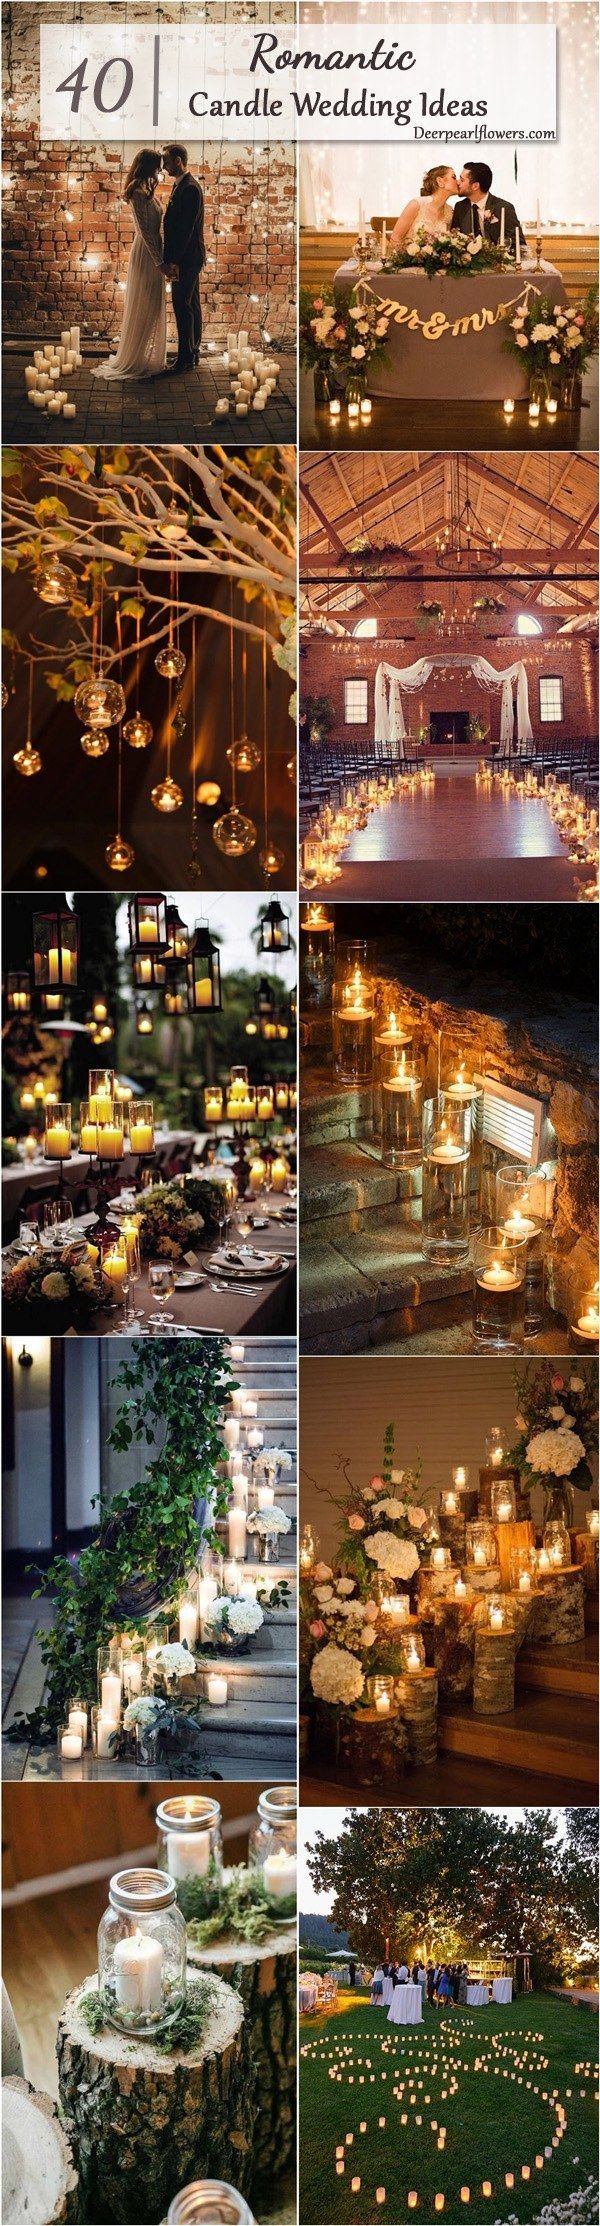 Rustic Country Wedding Ideas with Candles / www.deerpearlflow…